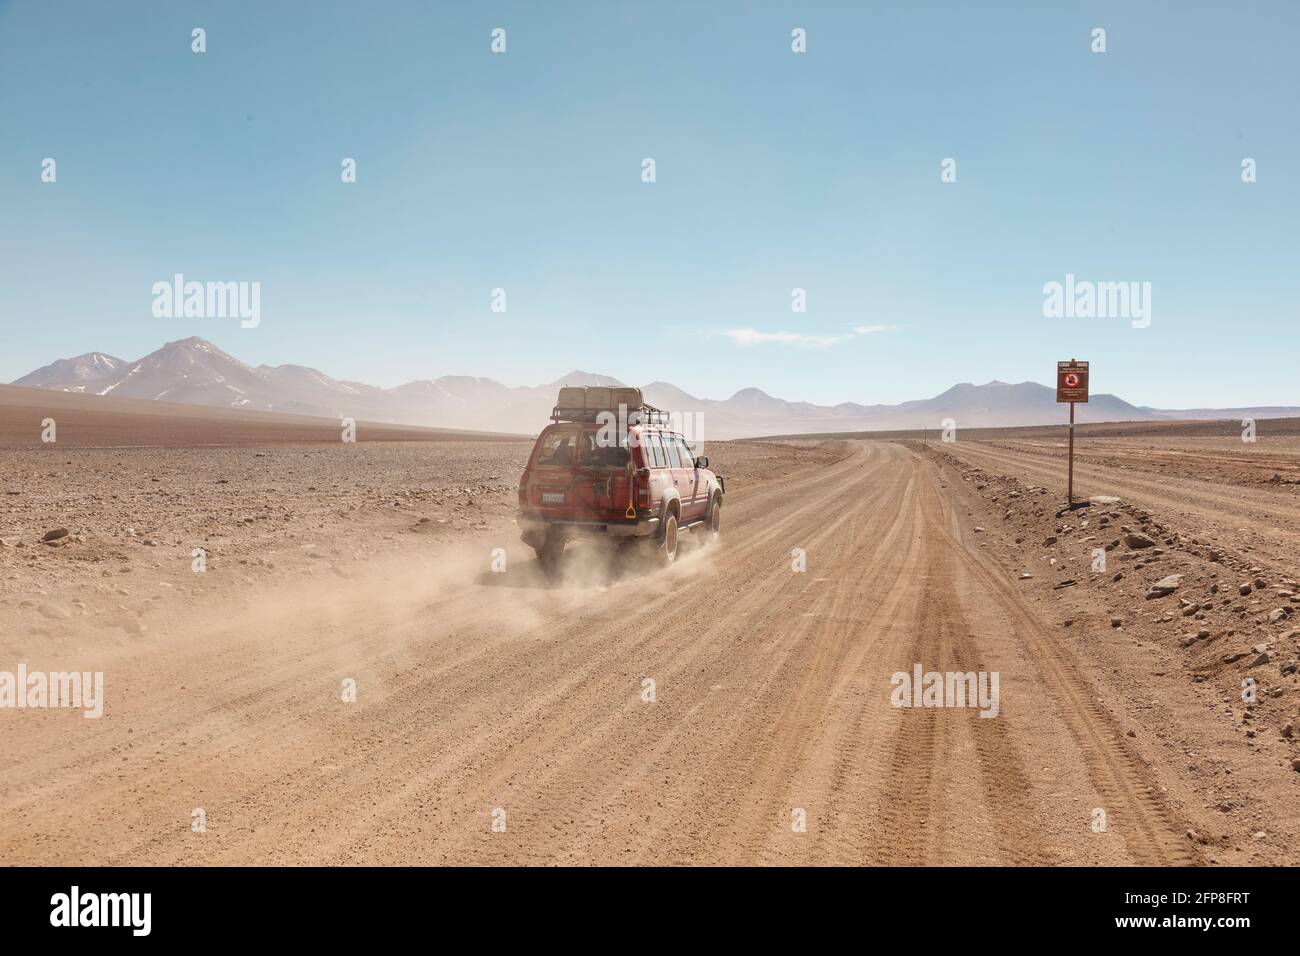 4x4 off-road, tourist vehicles driving across the Bolivia's desert landscape on an overland safari. Stock Photo